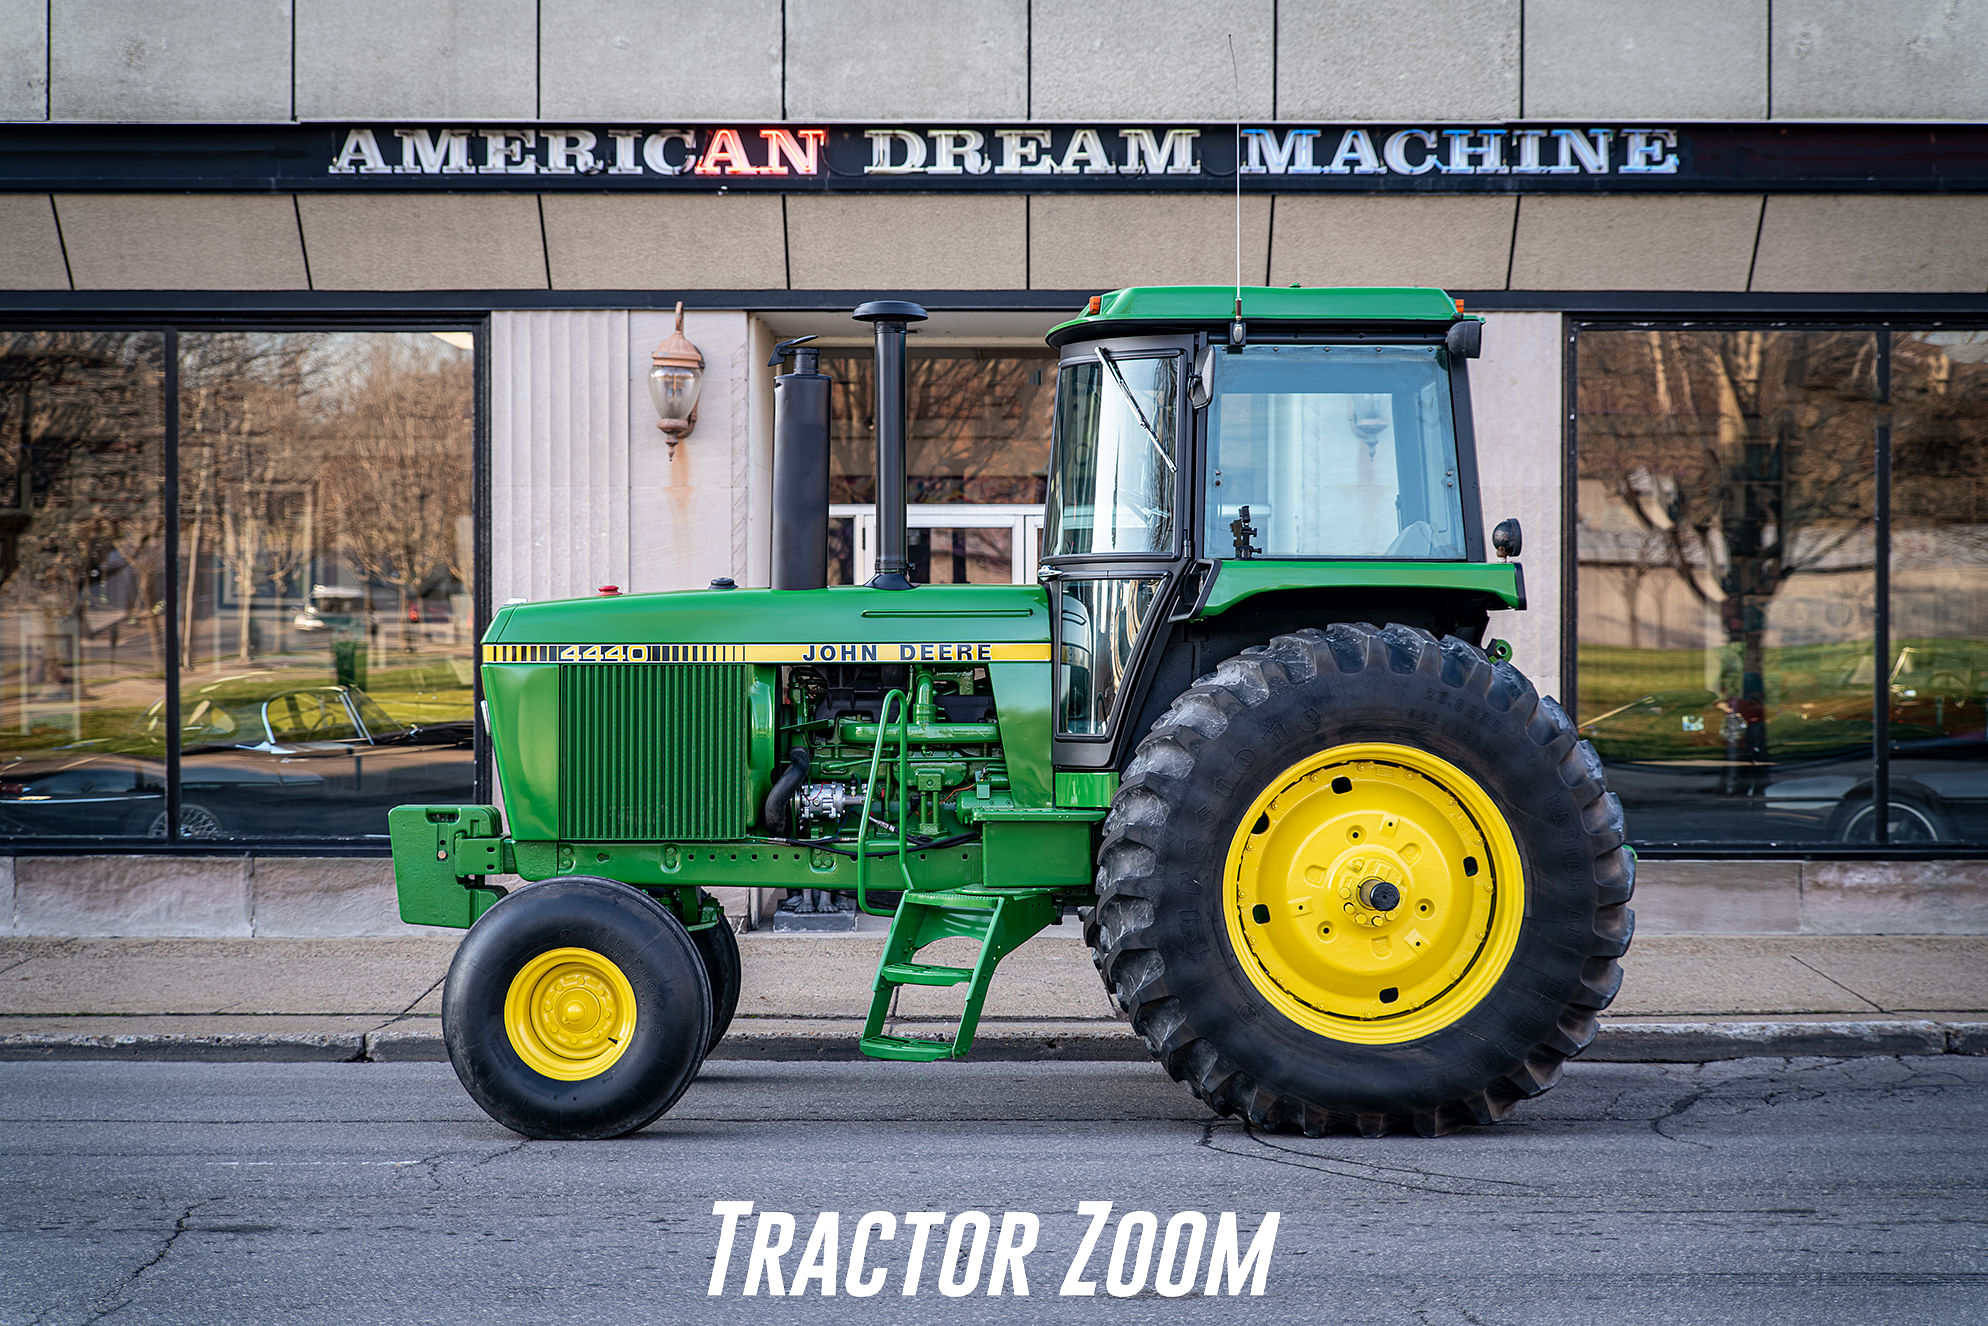 For a man from Tennessee, this John Deere 4440 actually was cheap horsepower...because he won it in our giveaway back in 2020!